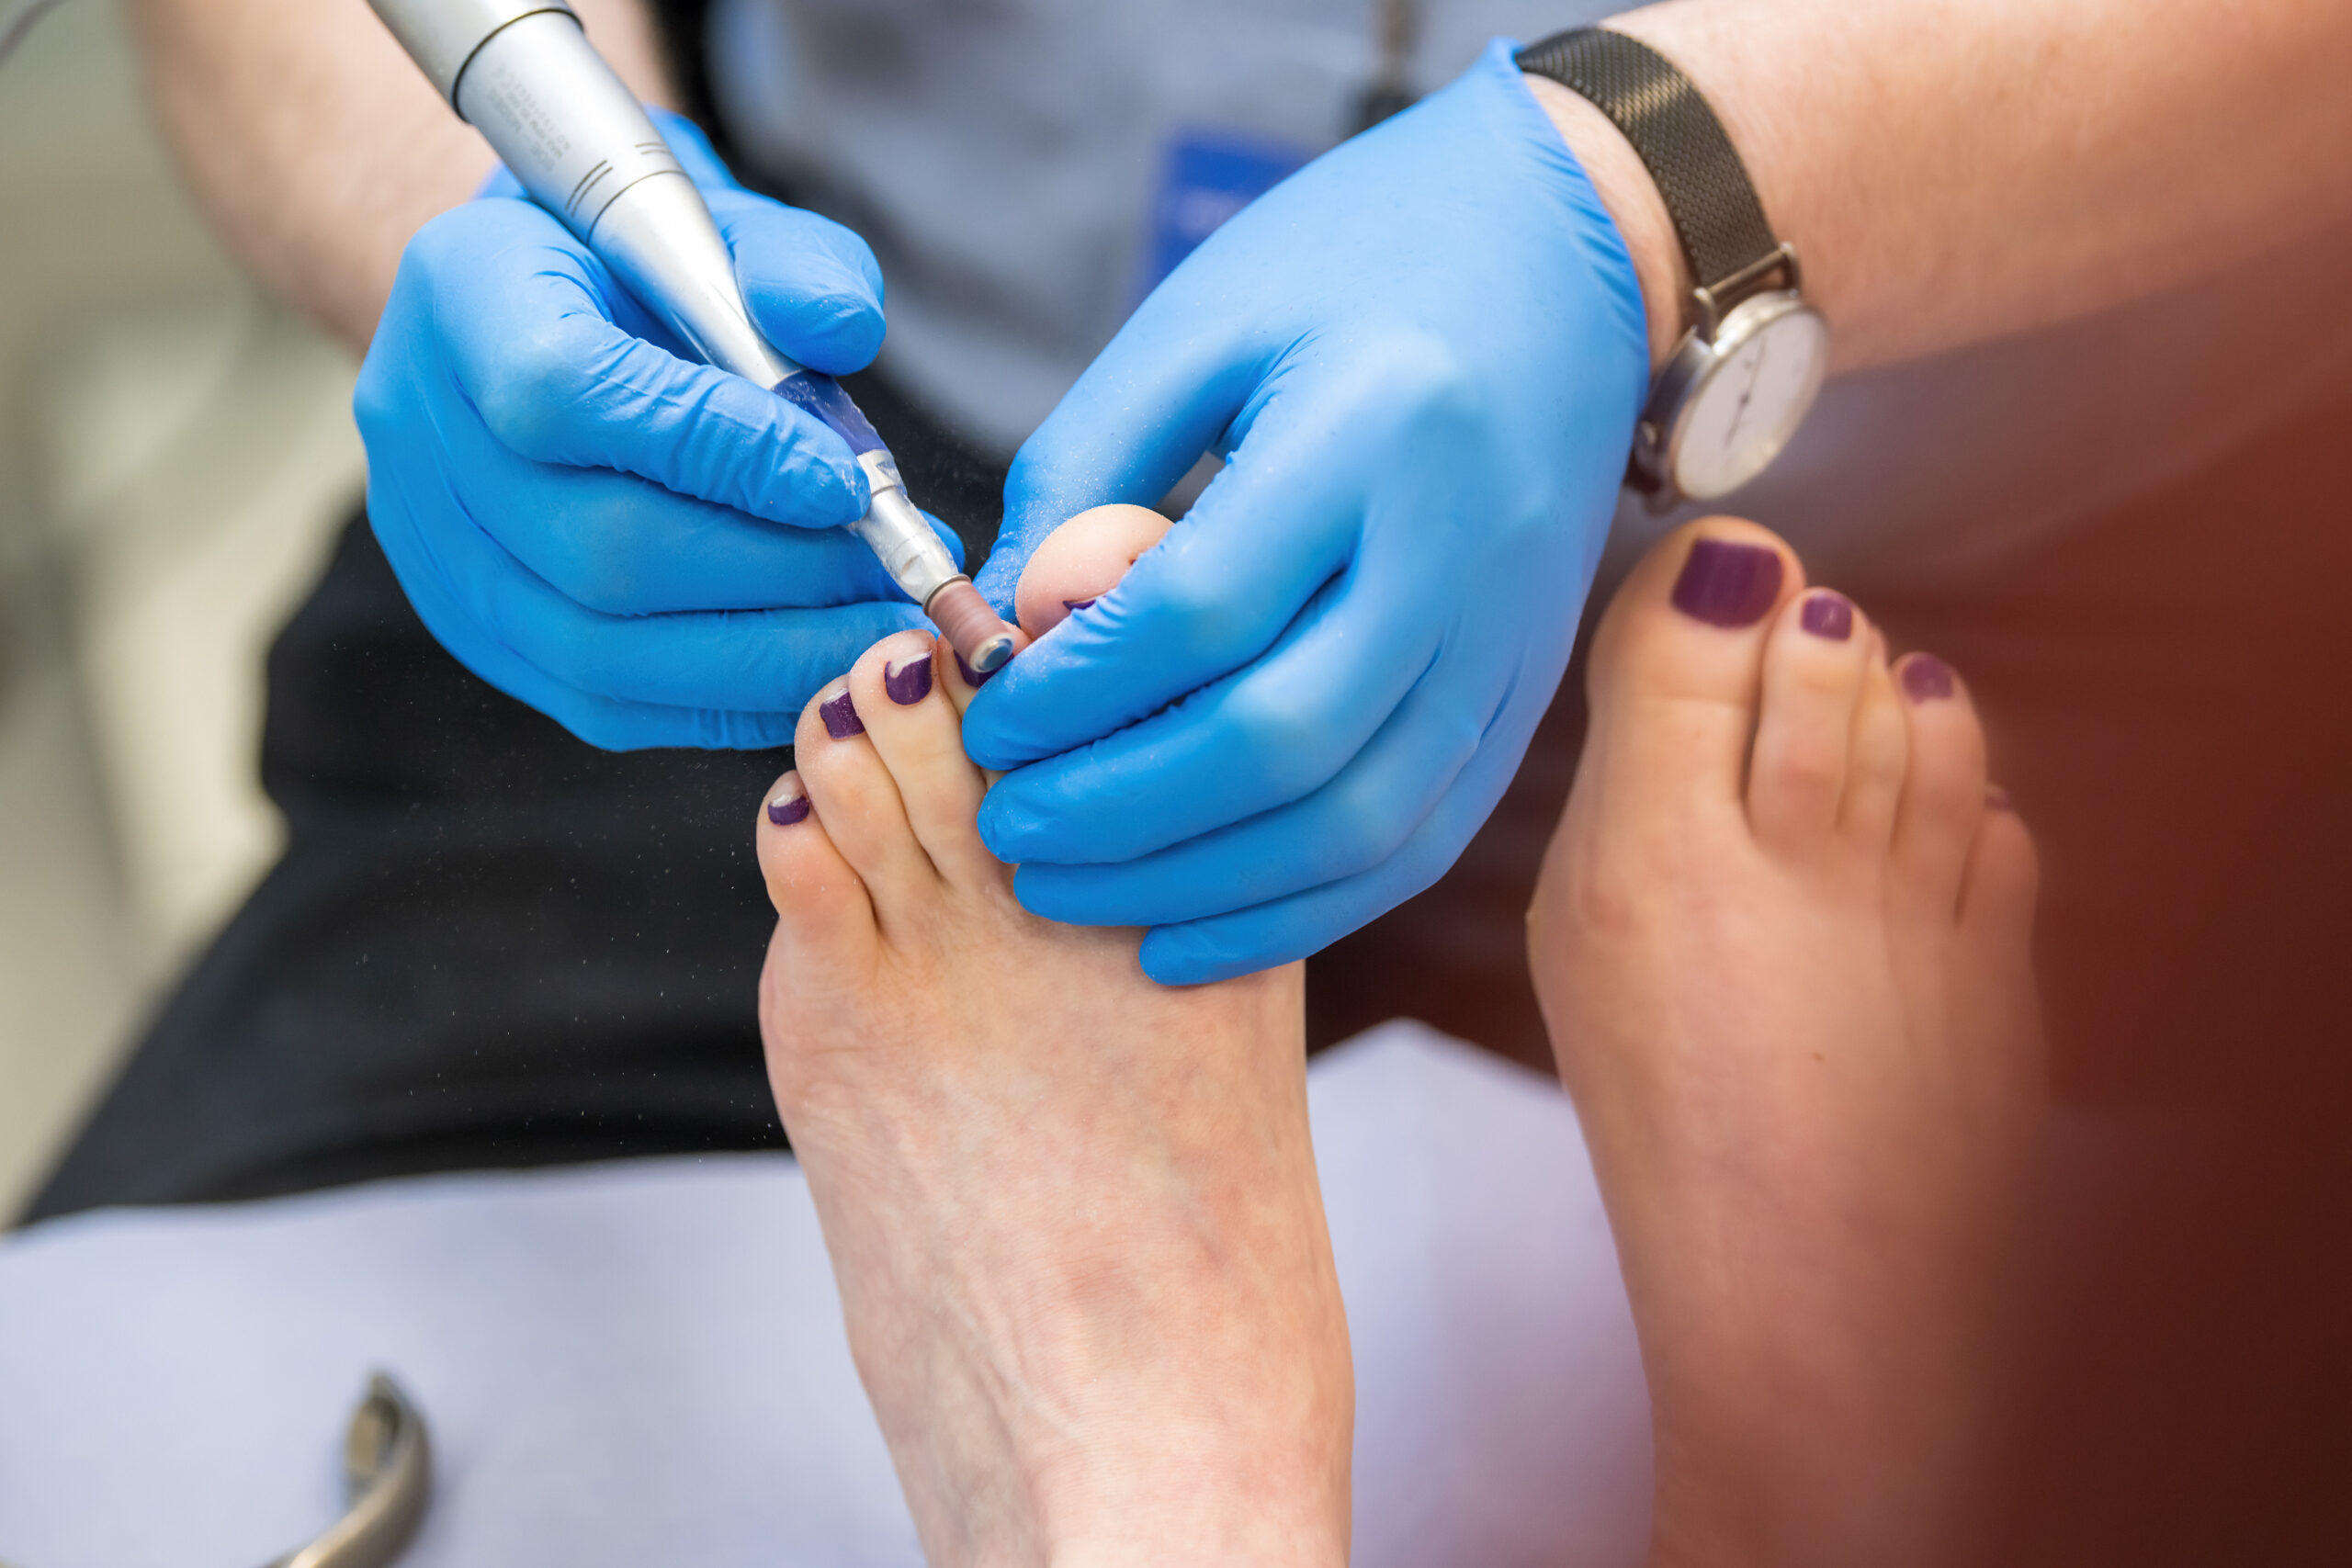 A podiatrist wearing blue latex gloves is working on a woman's feet with a metal tool. The women's toenails are painted dark purple.